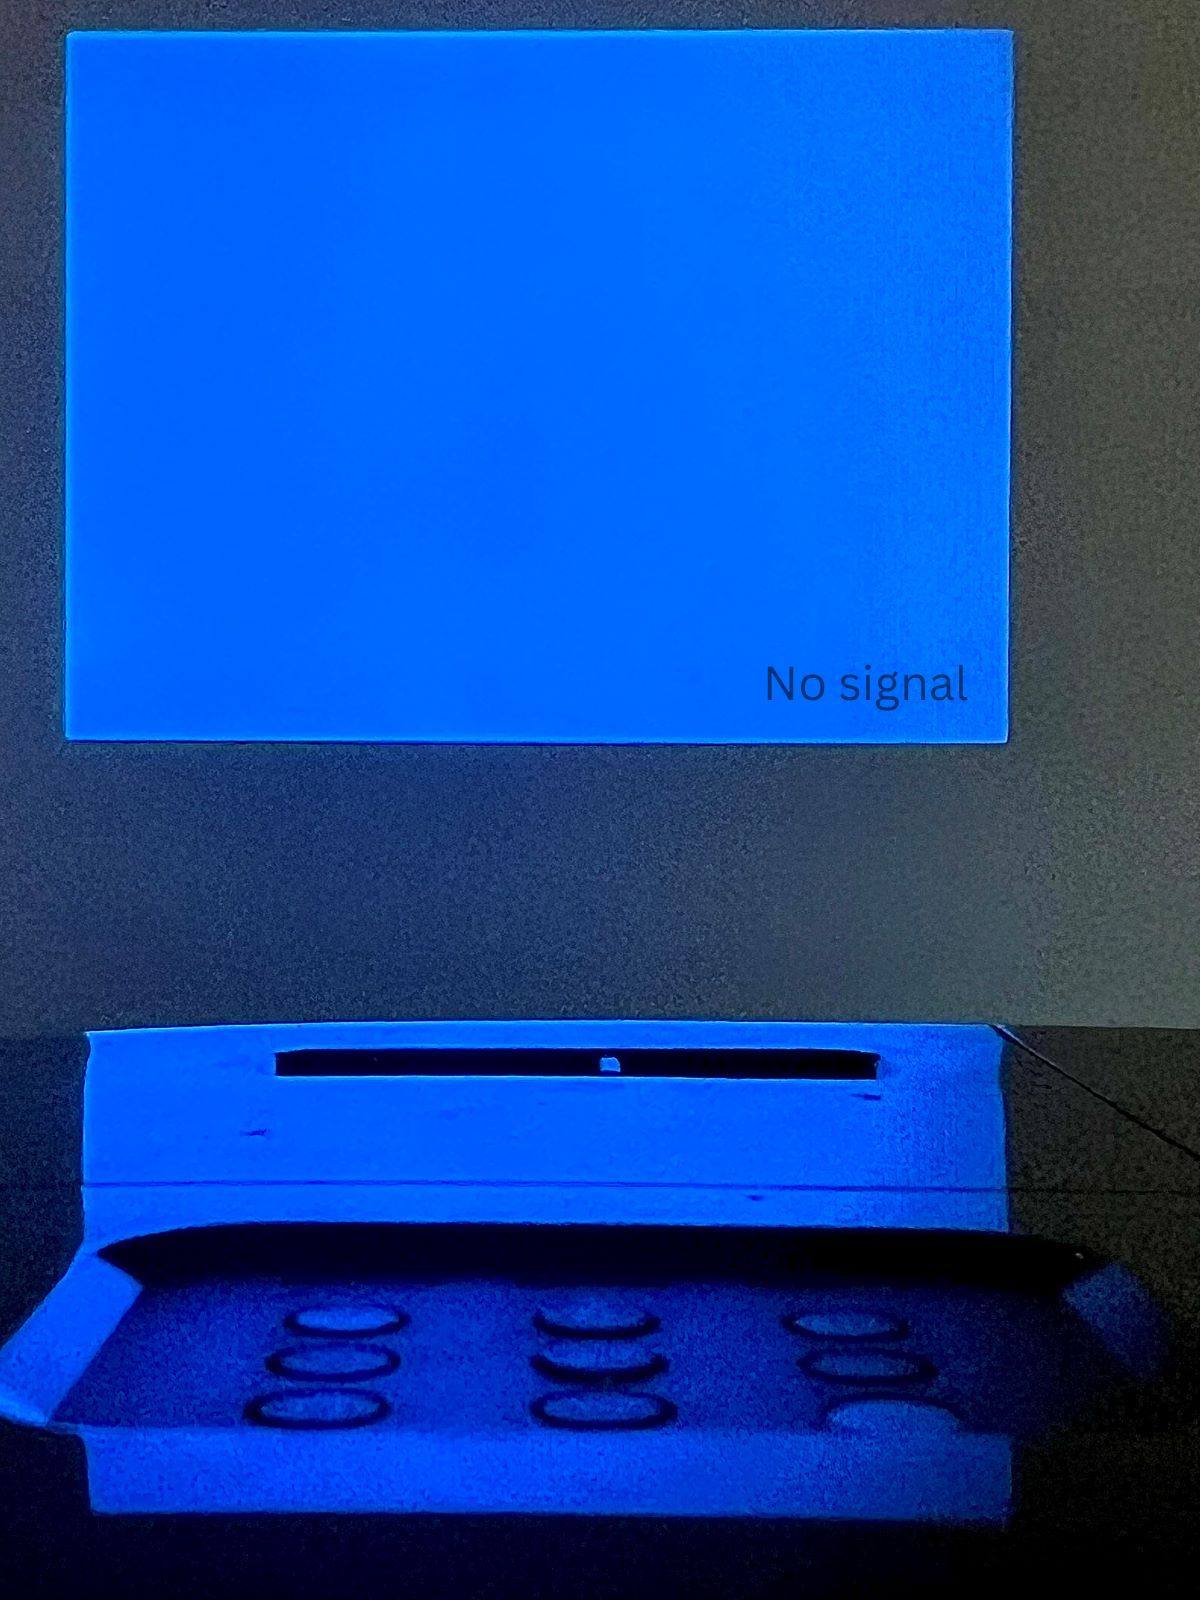 Optoma projector showing no signal message